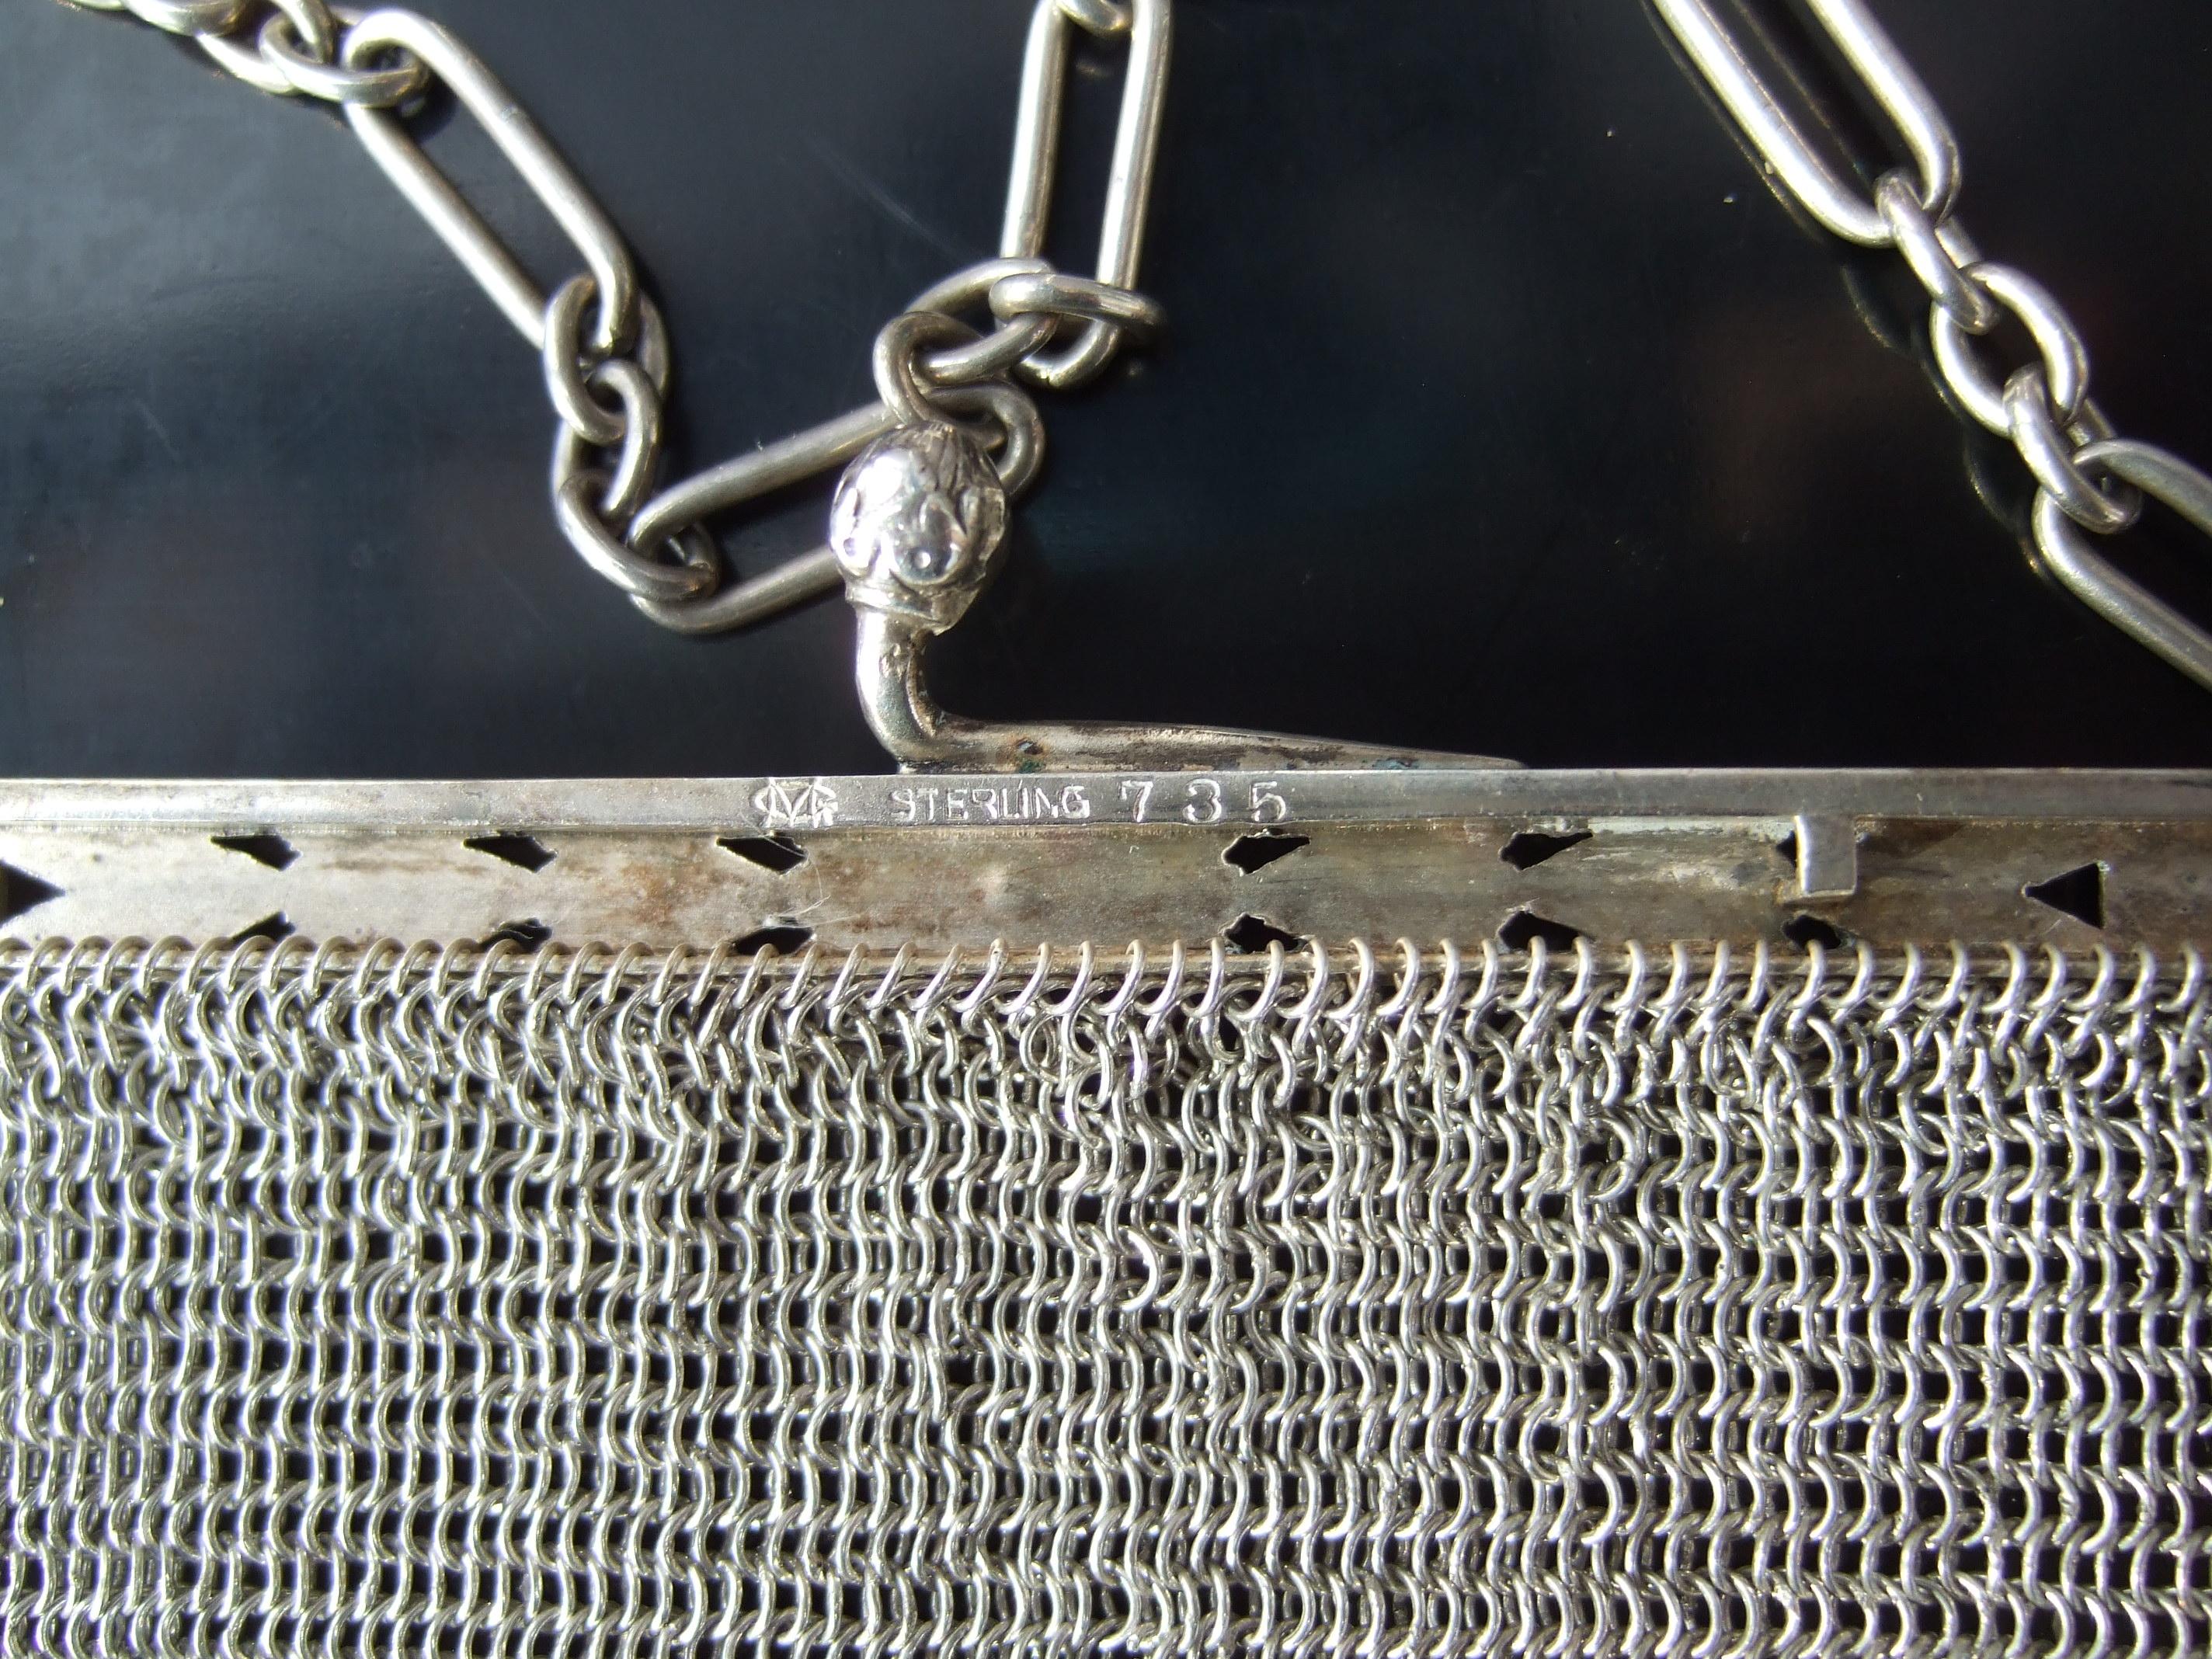 Women's Tiffany & Co. Rare Sterling Silver Chain Mail Evening Bag c 1910